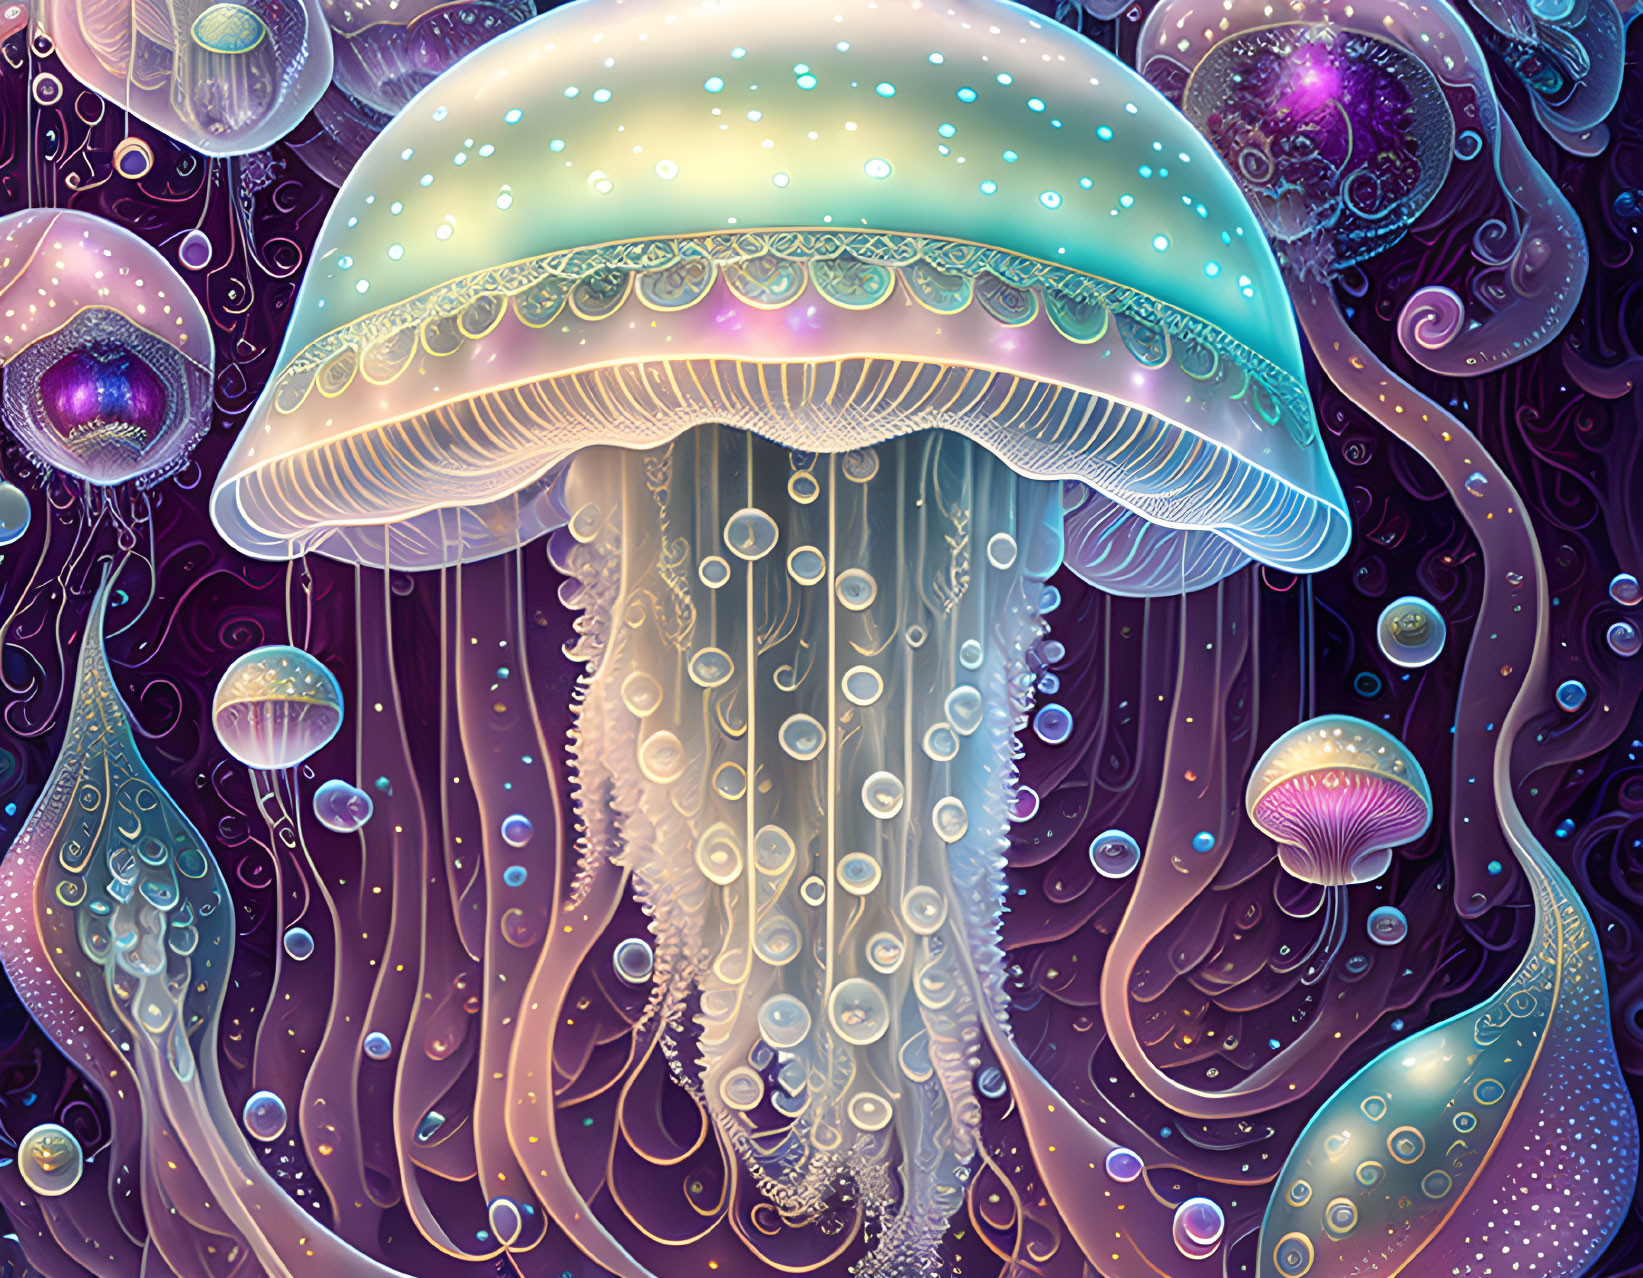 Colorful Fantastical Jellyfish Illustration with Glowing Tentacles